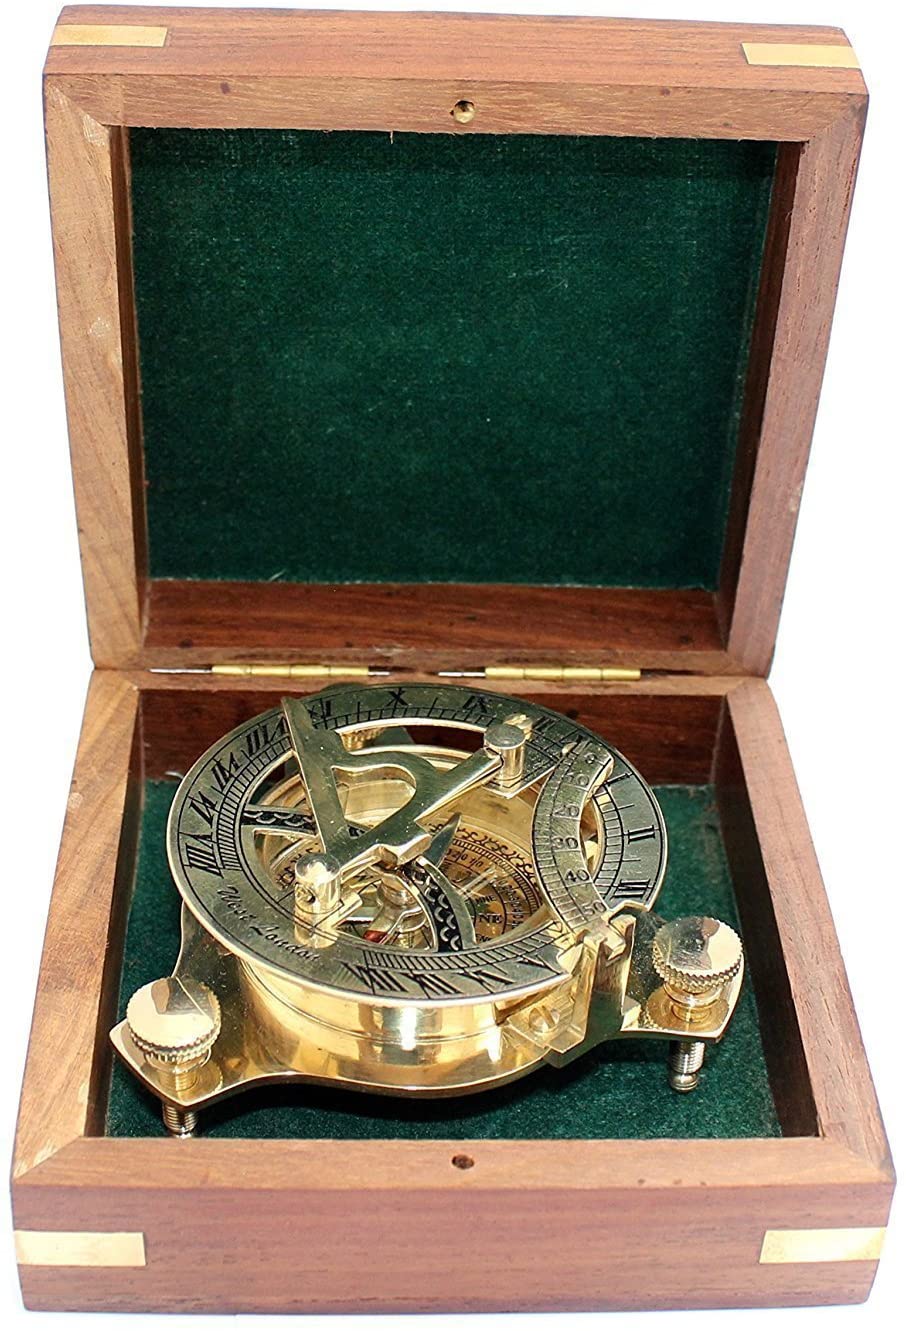 MARITIME NAUTICAL VINTAGE STYLE SUNDIAL POLISHED BRASS COMPASS 3" WOODEN BOX 